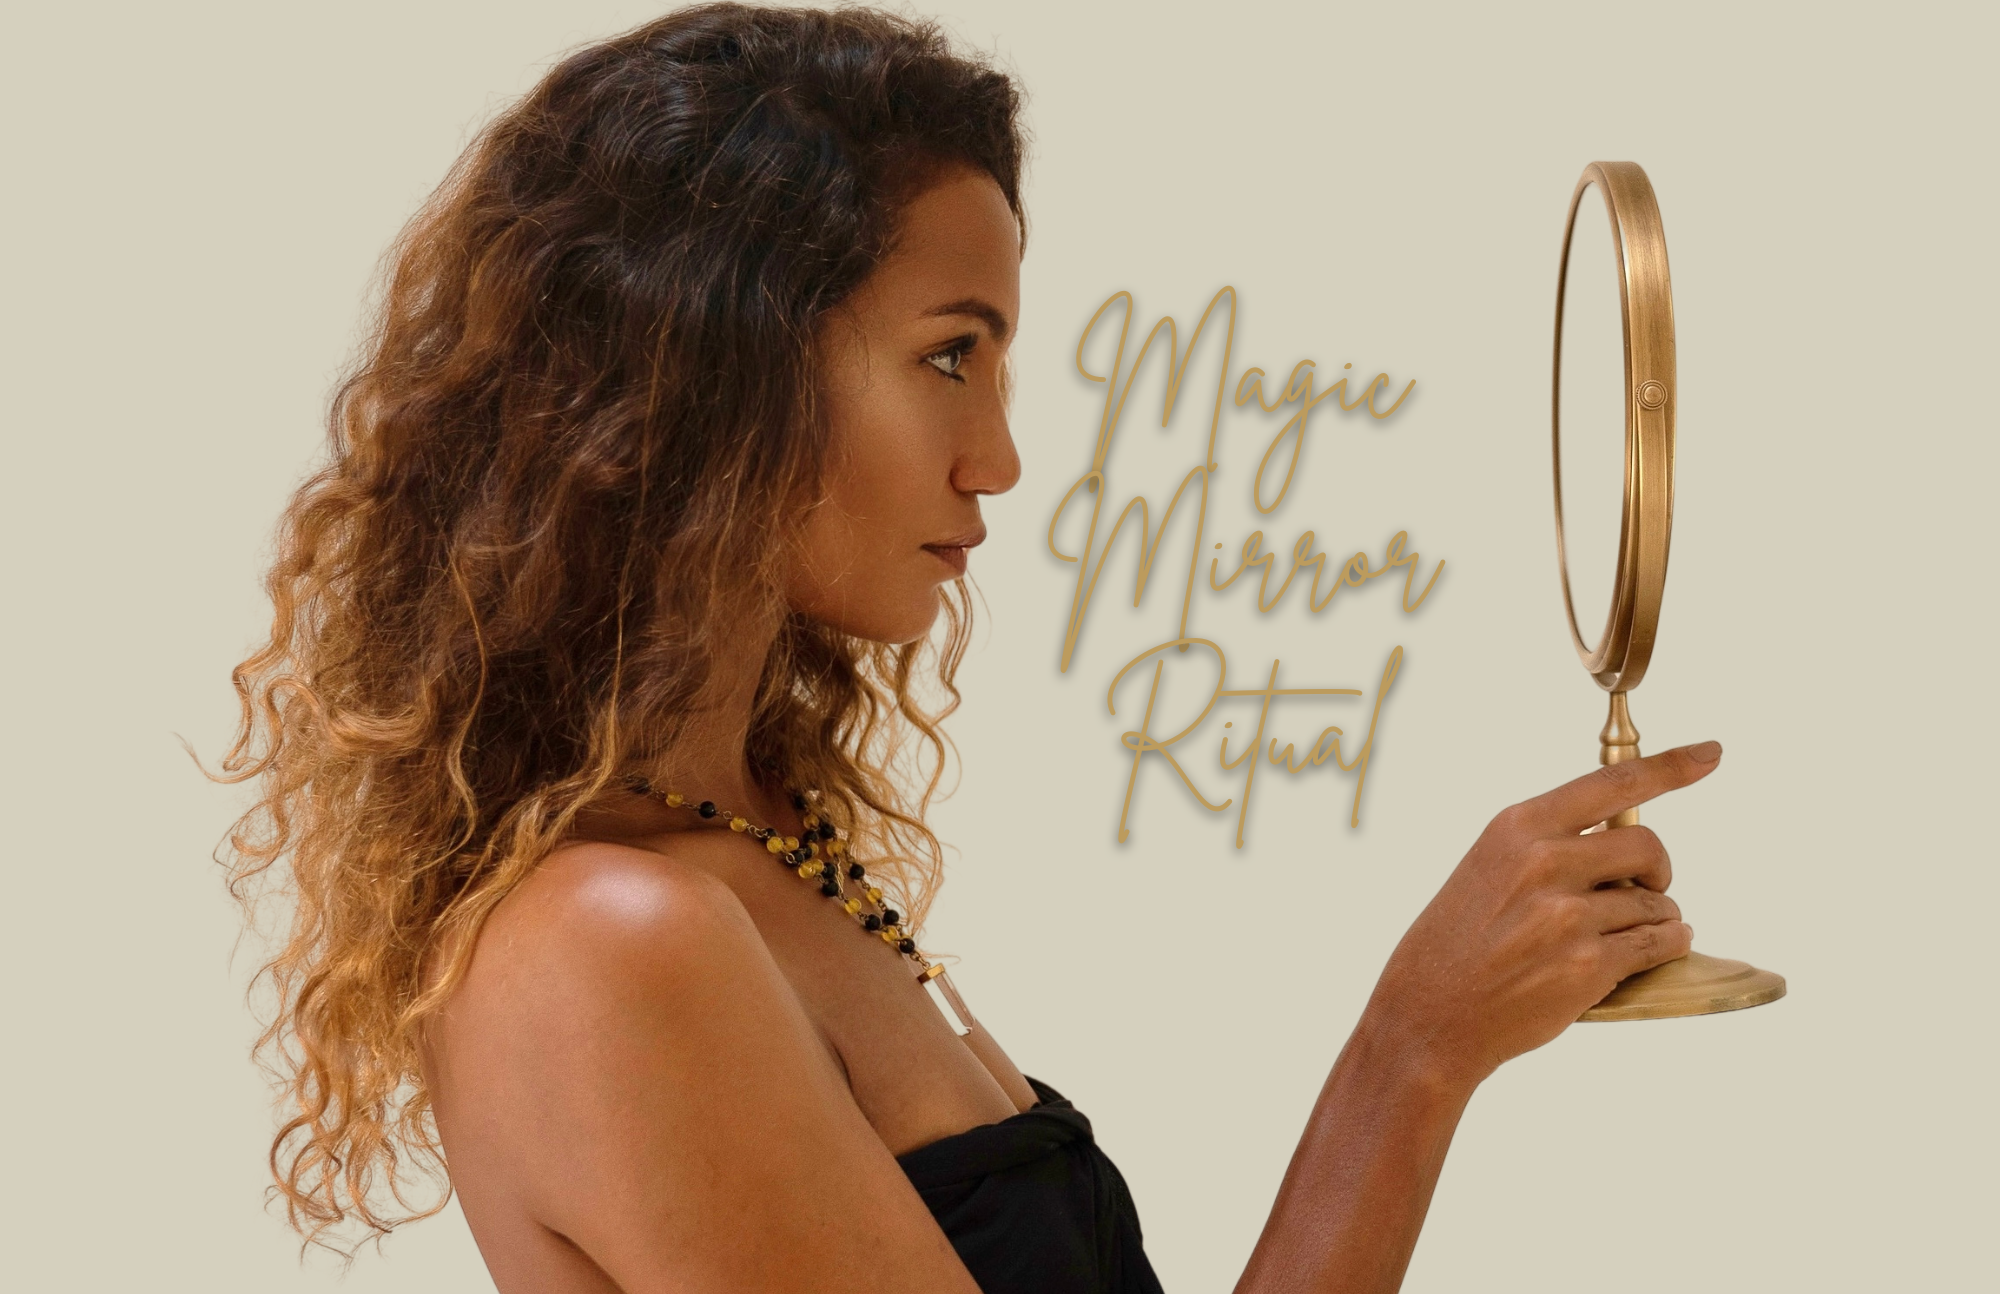 Load video: magic mirror ritual with emmanuelle blanc unleash your inner wealth - recreate your reality 10=week online program on zoom